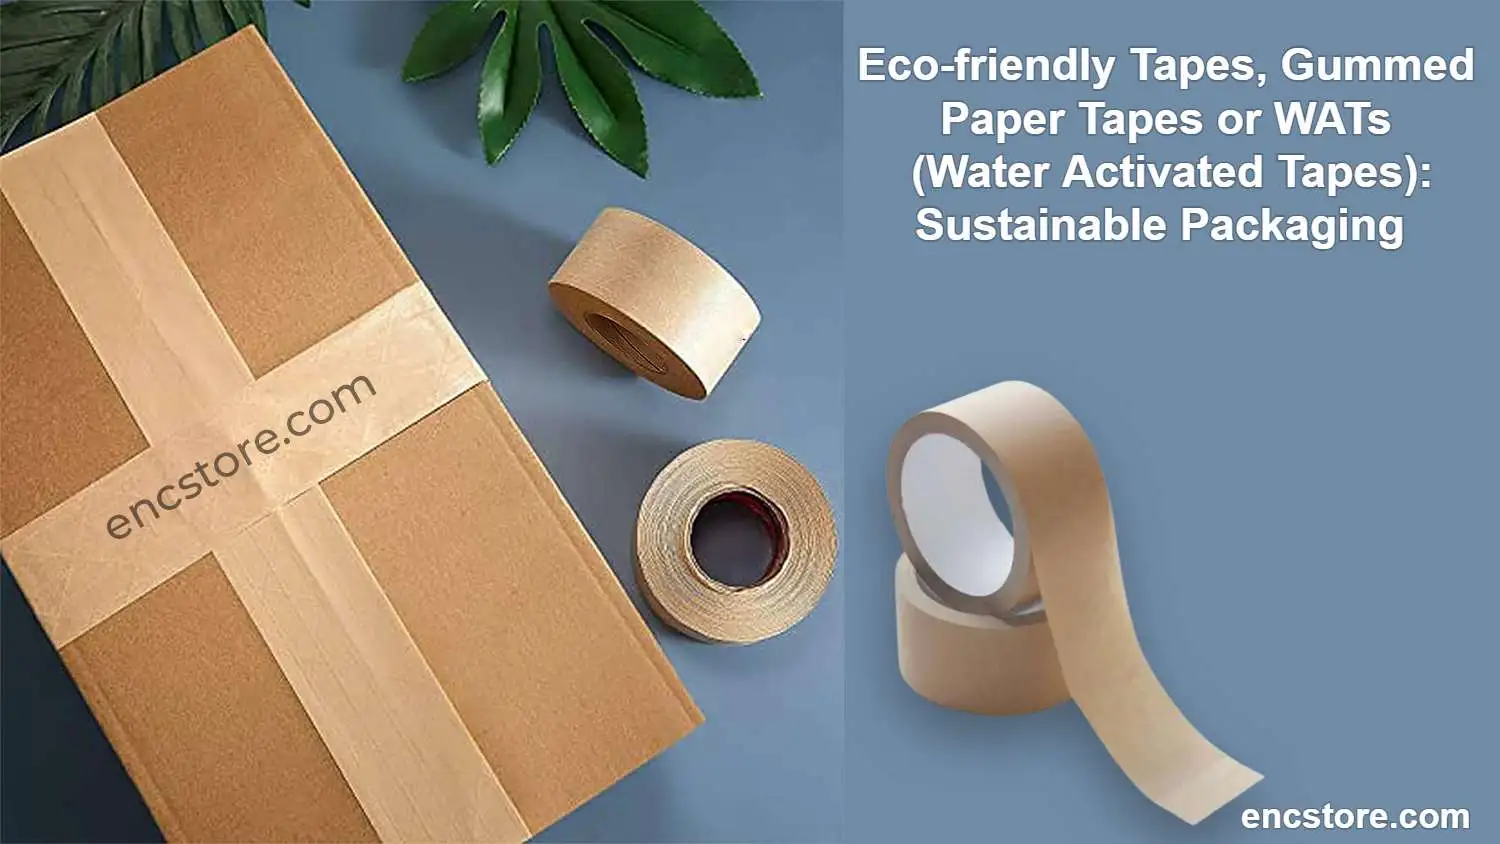 Eco-friendly Tapes